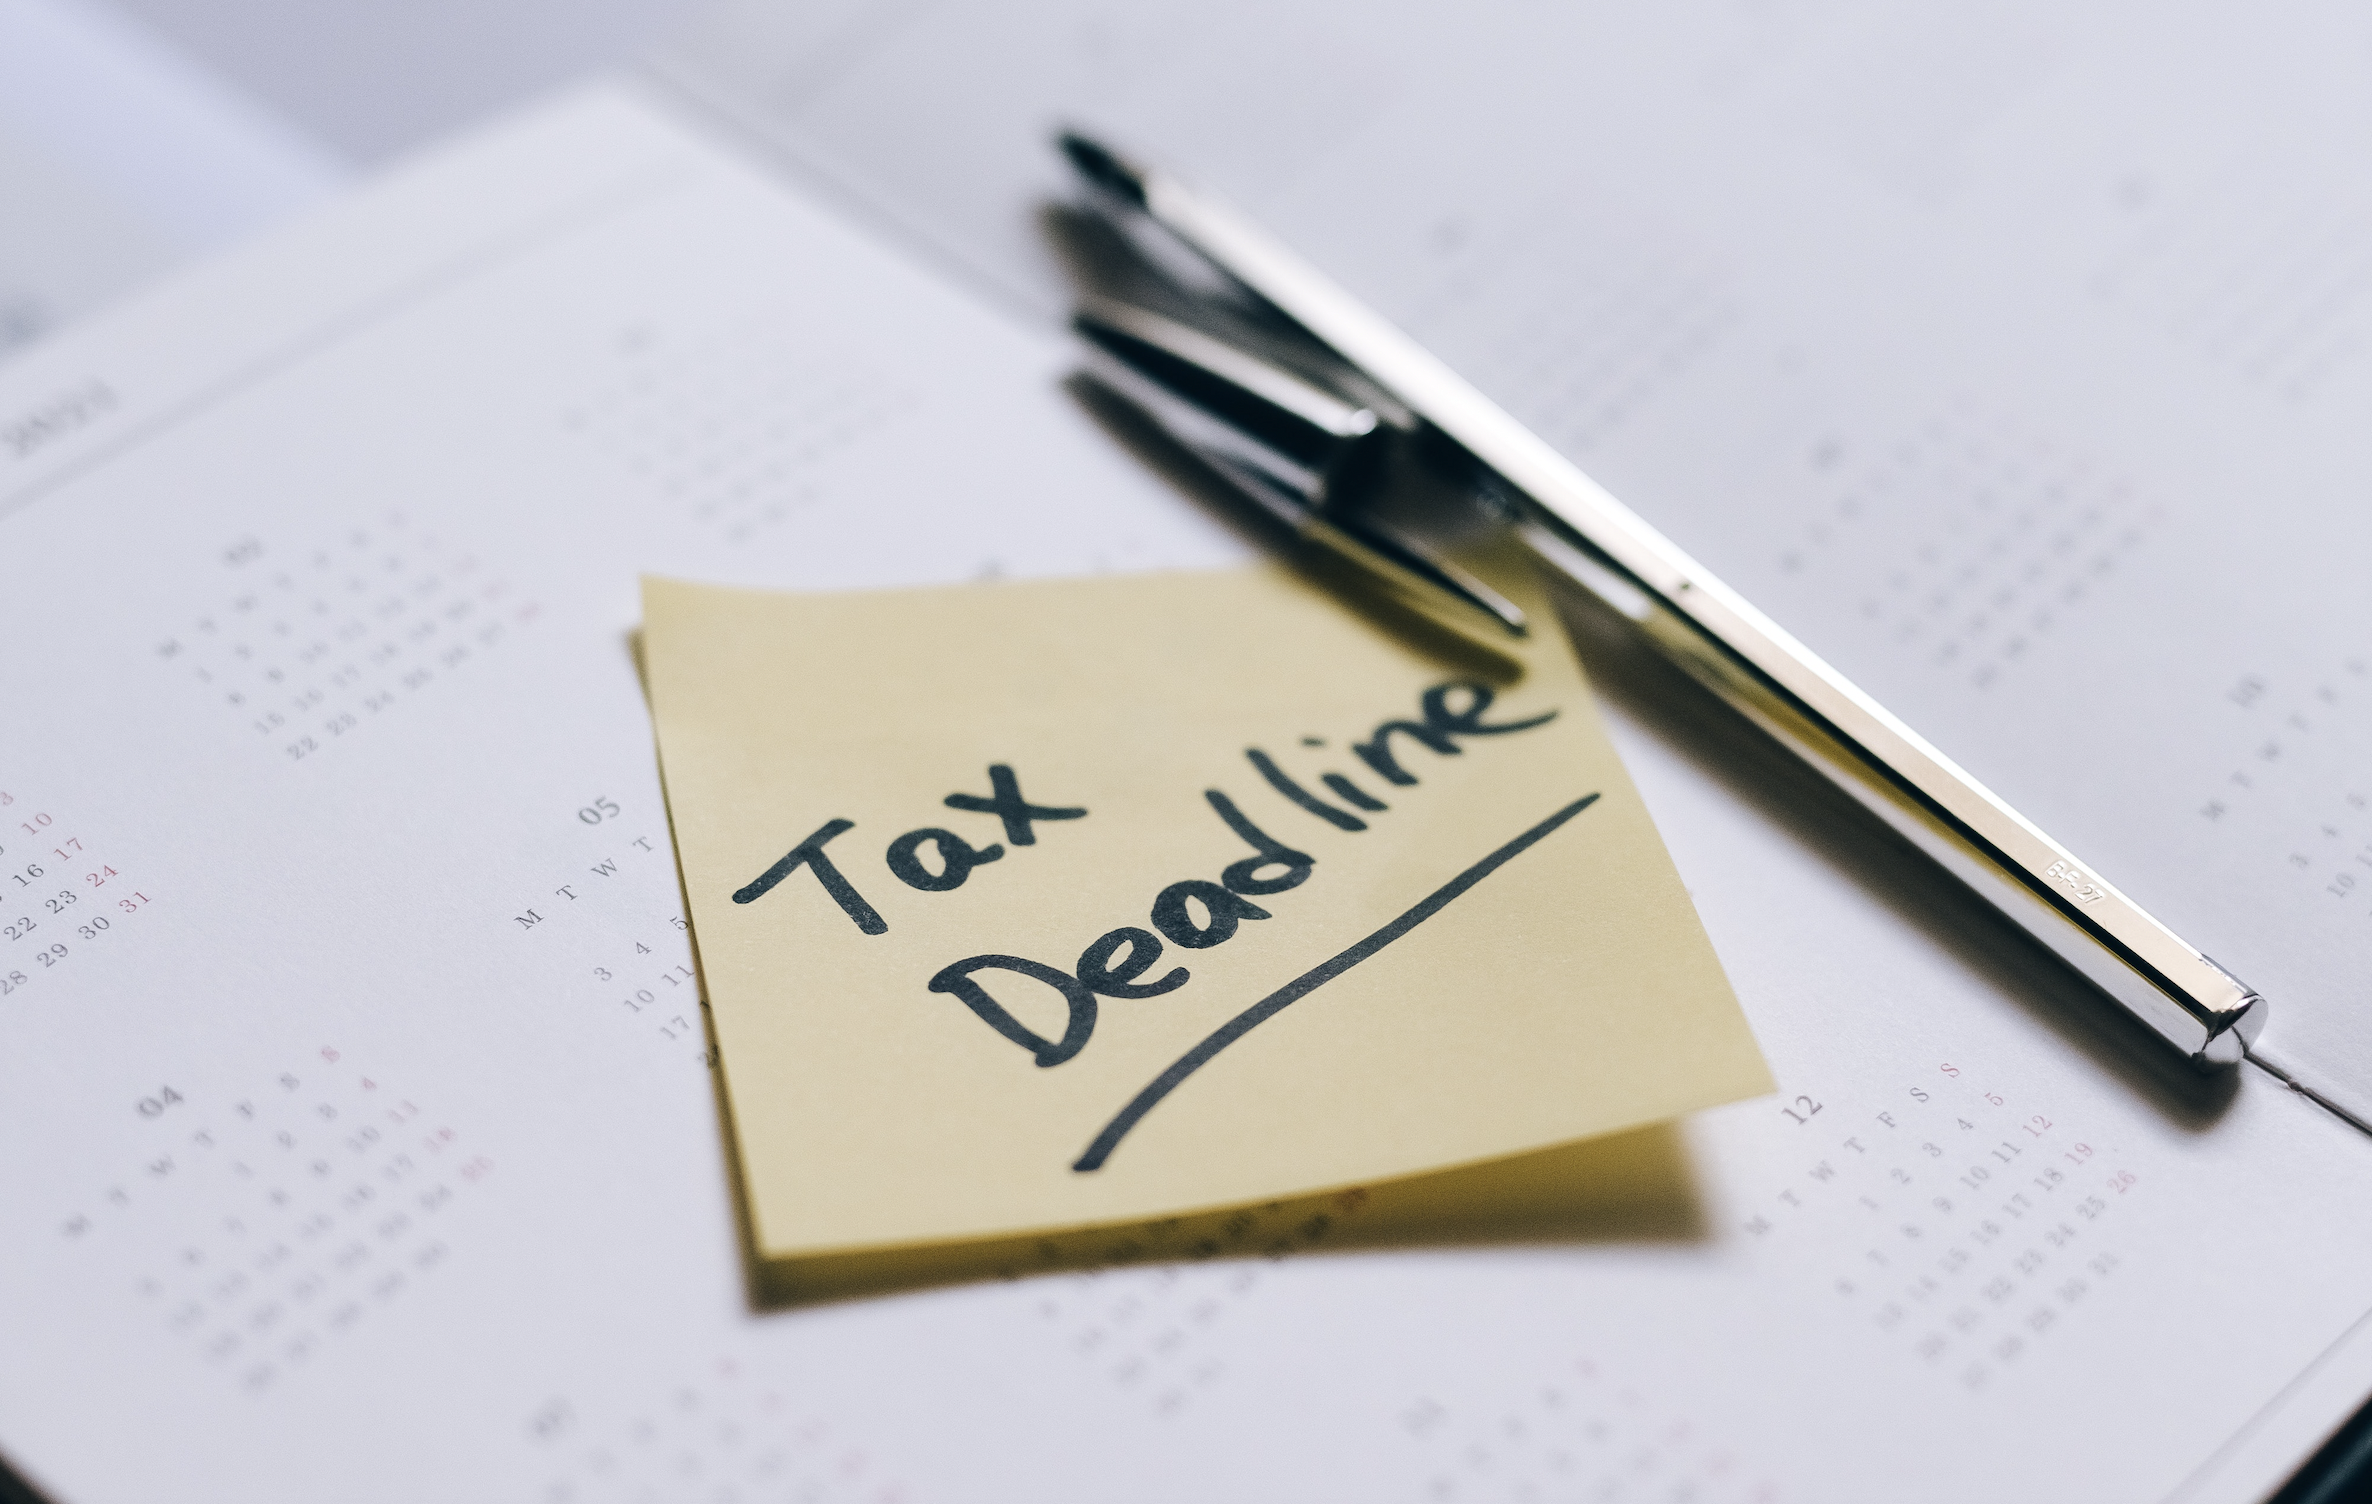 Financial wellbeing for employees during tax season